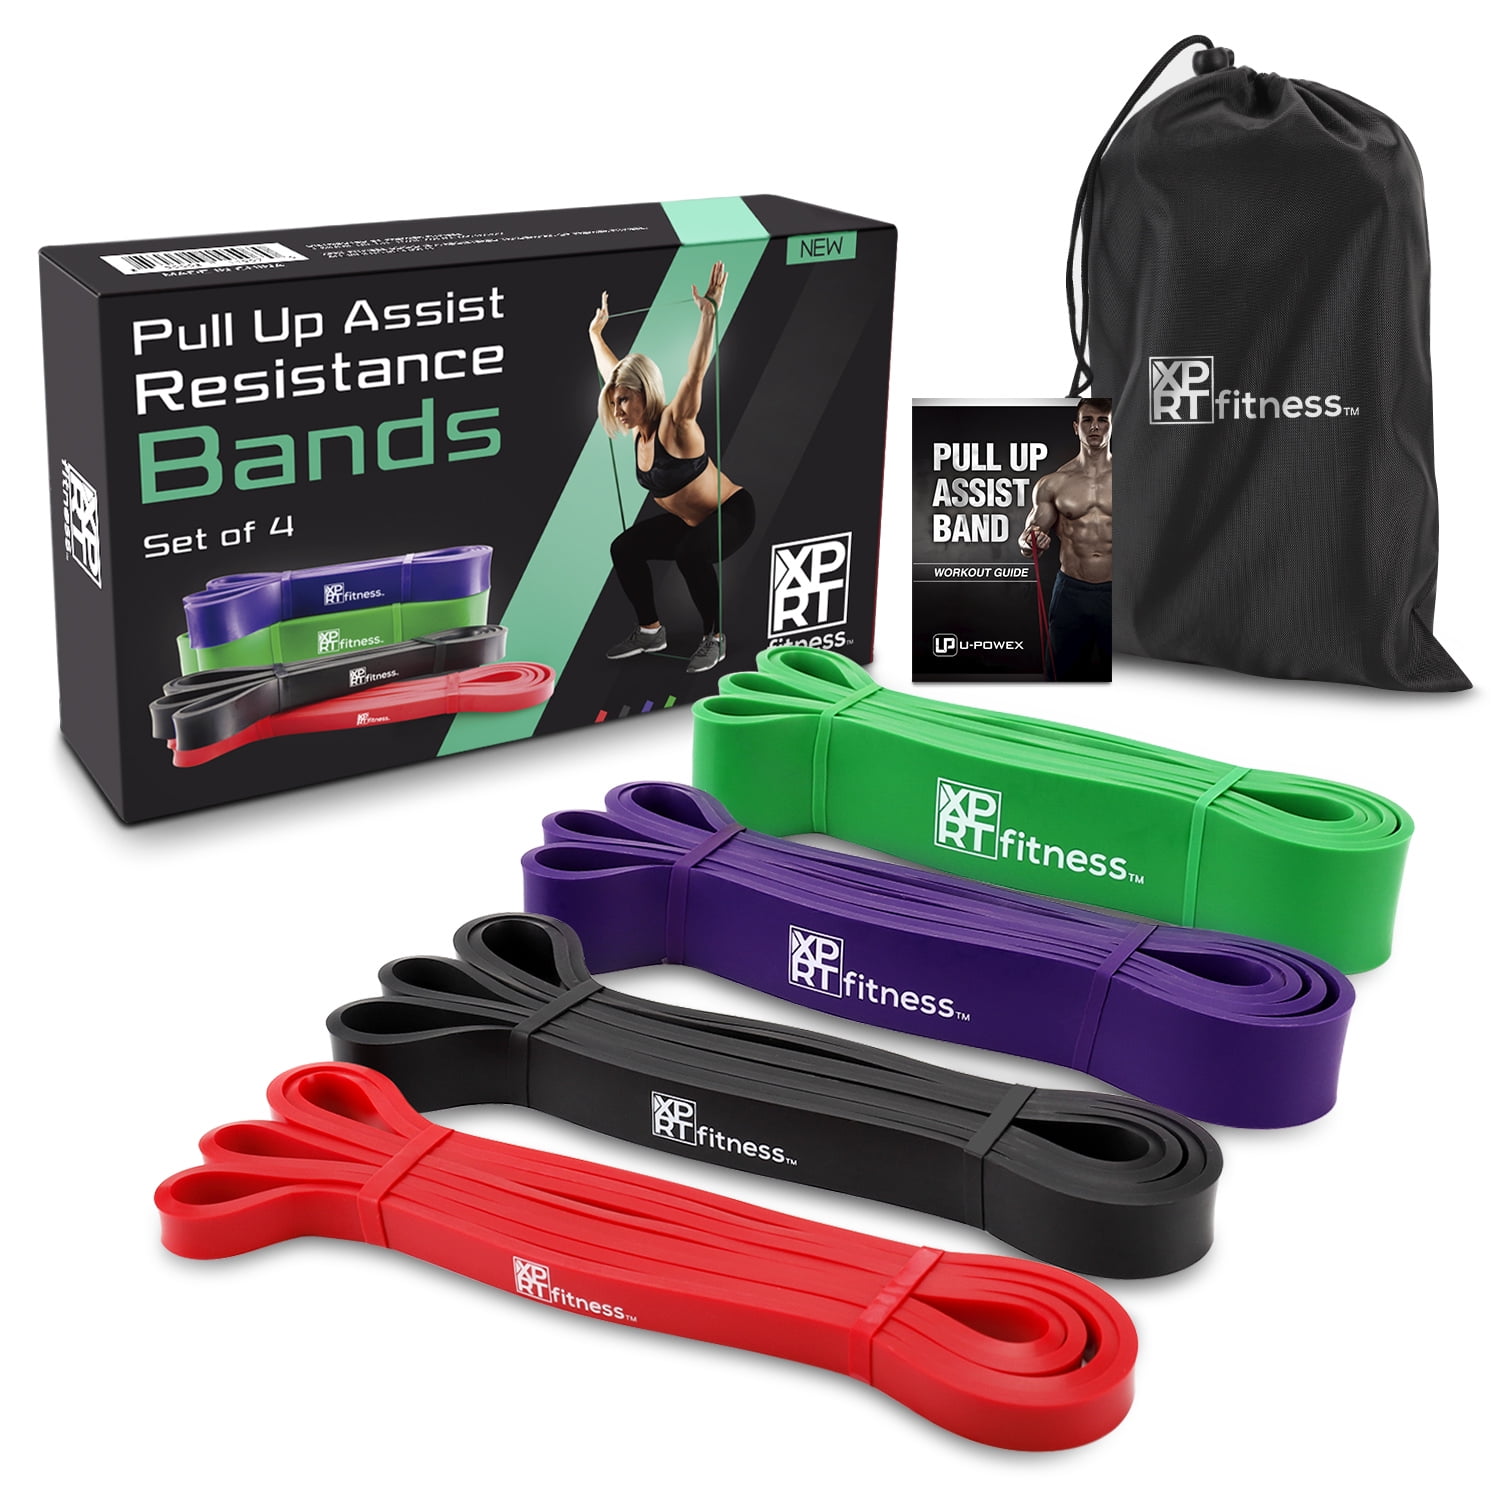 XPRT Fitness Resistance Bands Pull Up Assist Bands Stretching